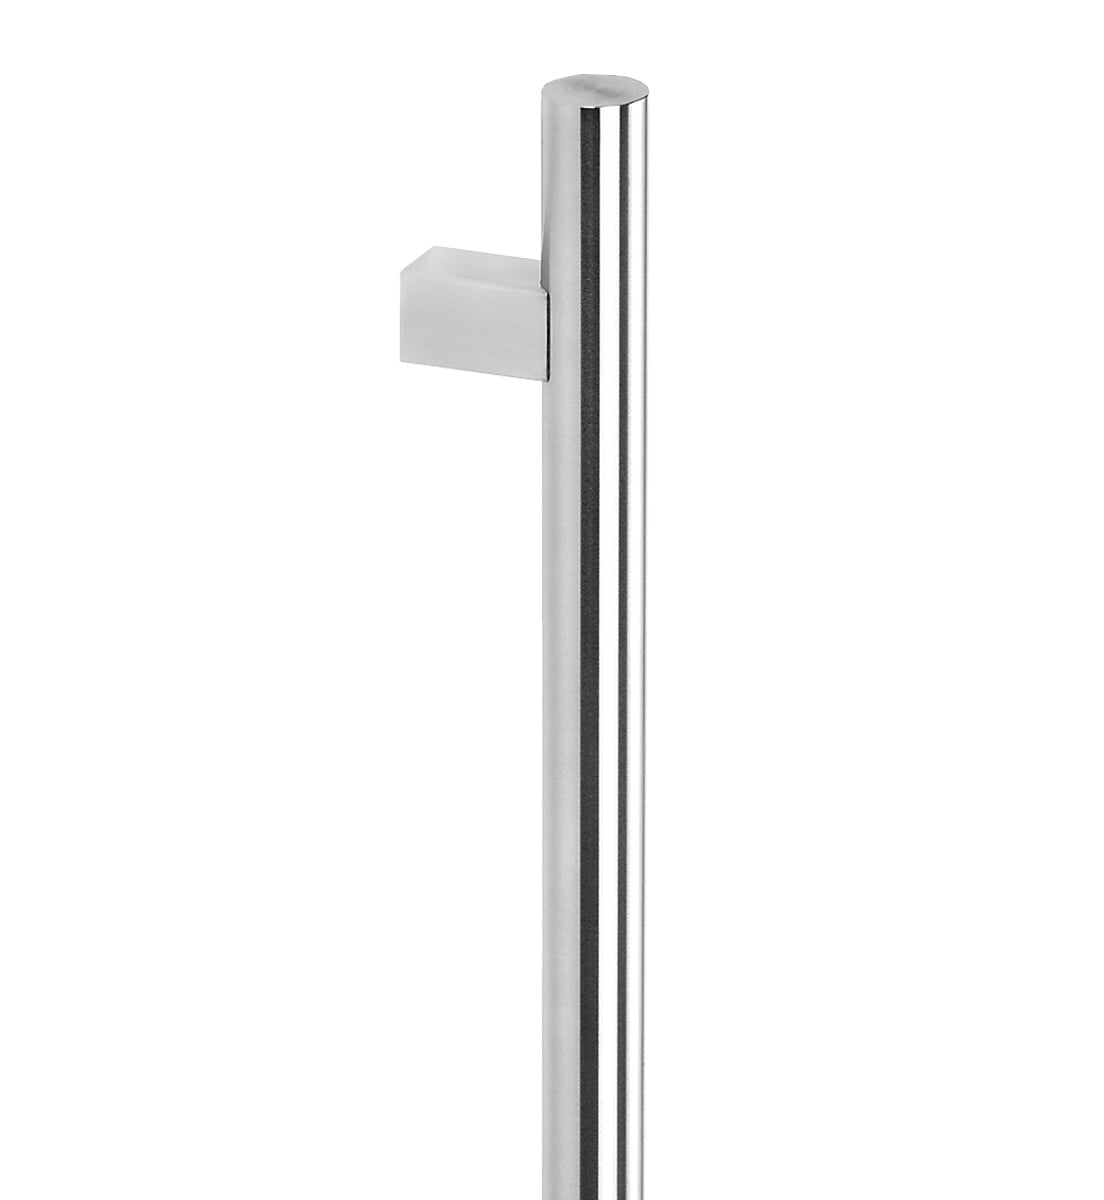 8270 Single Entrance Handle, Rear Disk Fix, 800mm x 38mm, CTC 700mm in Satin Stainless